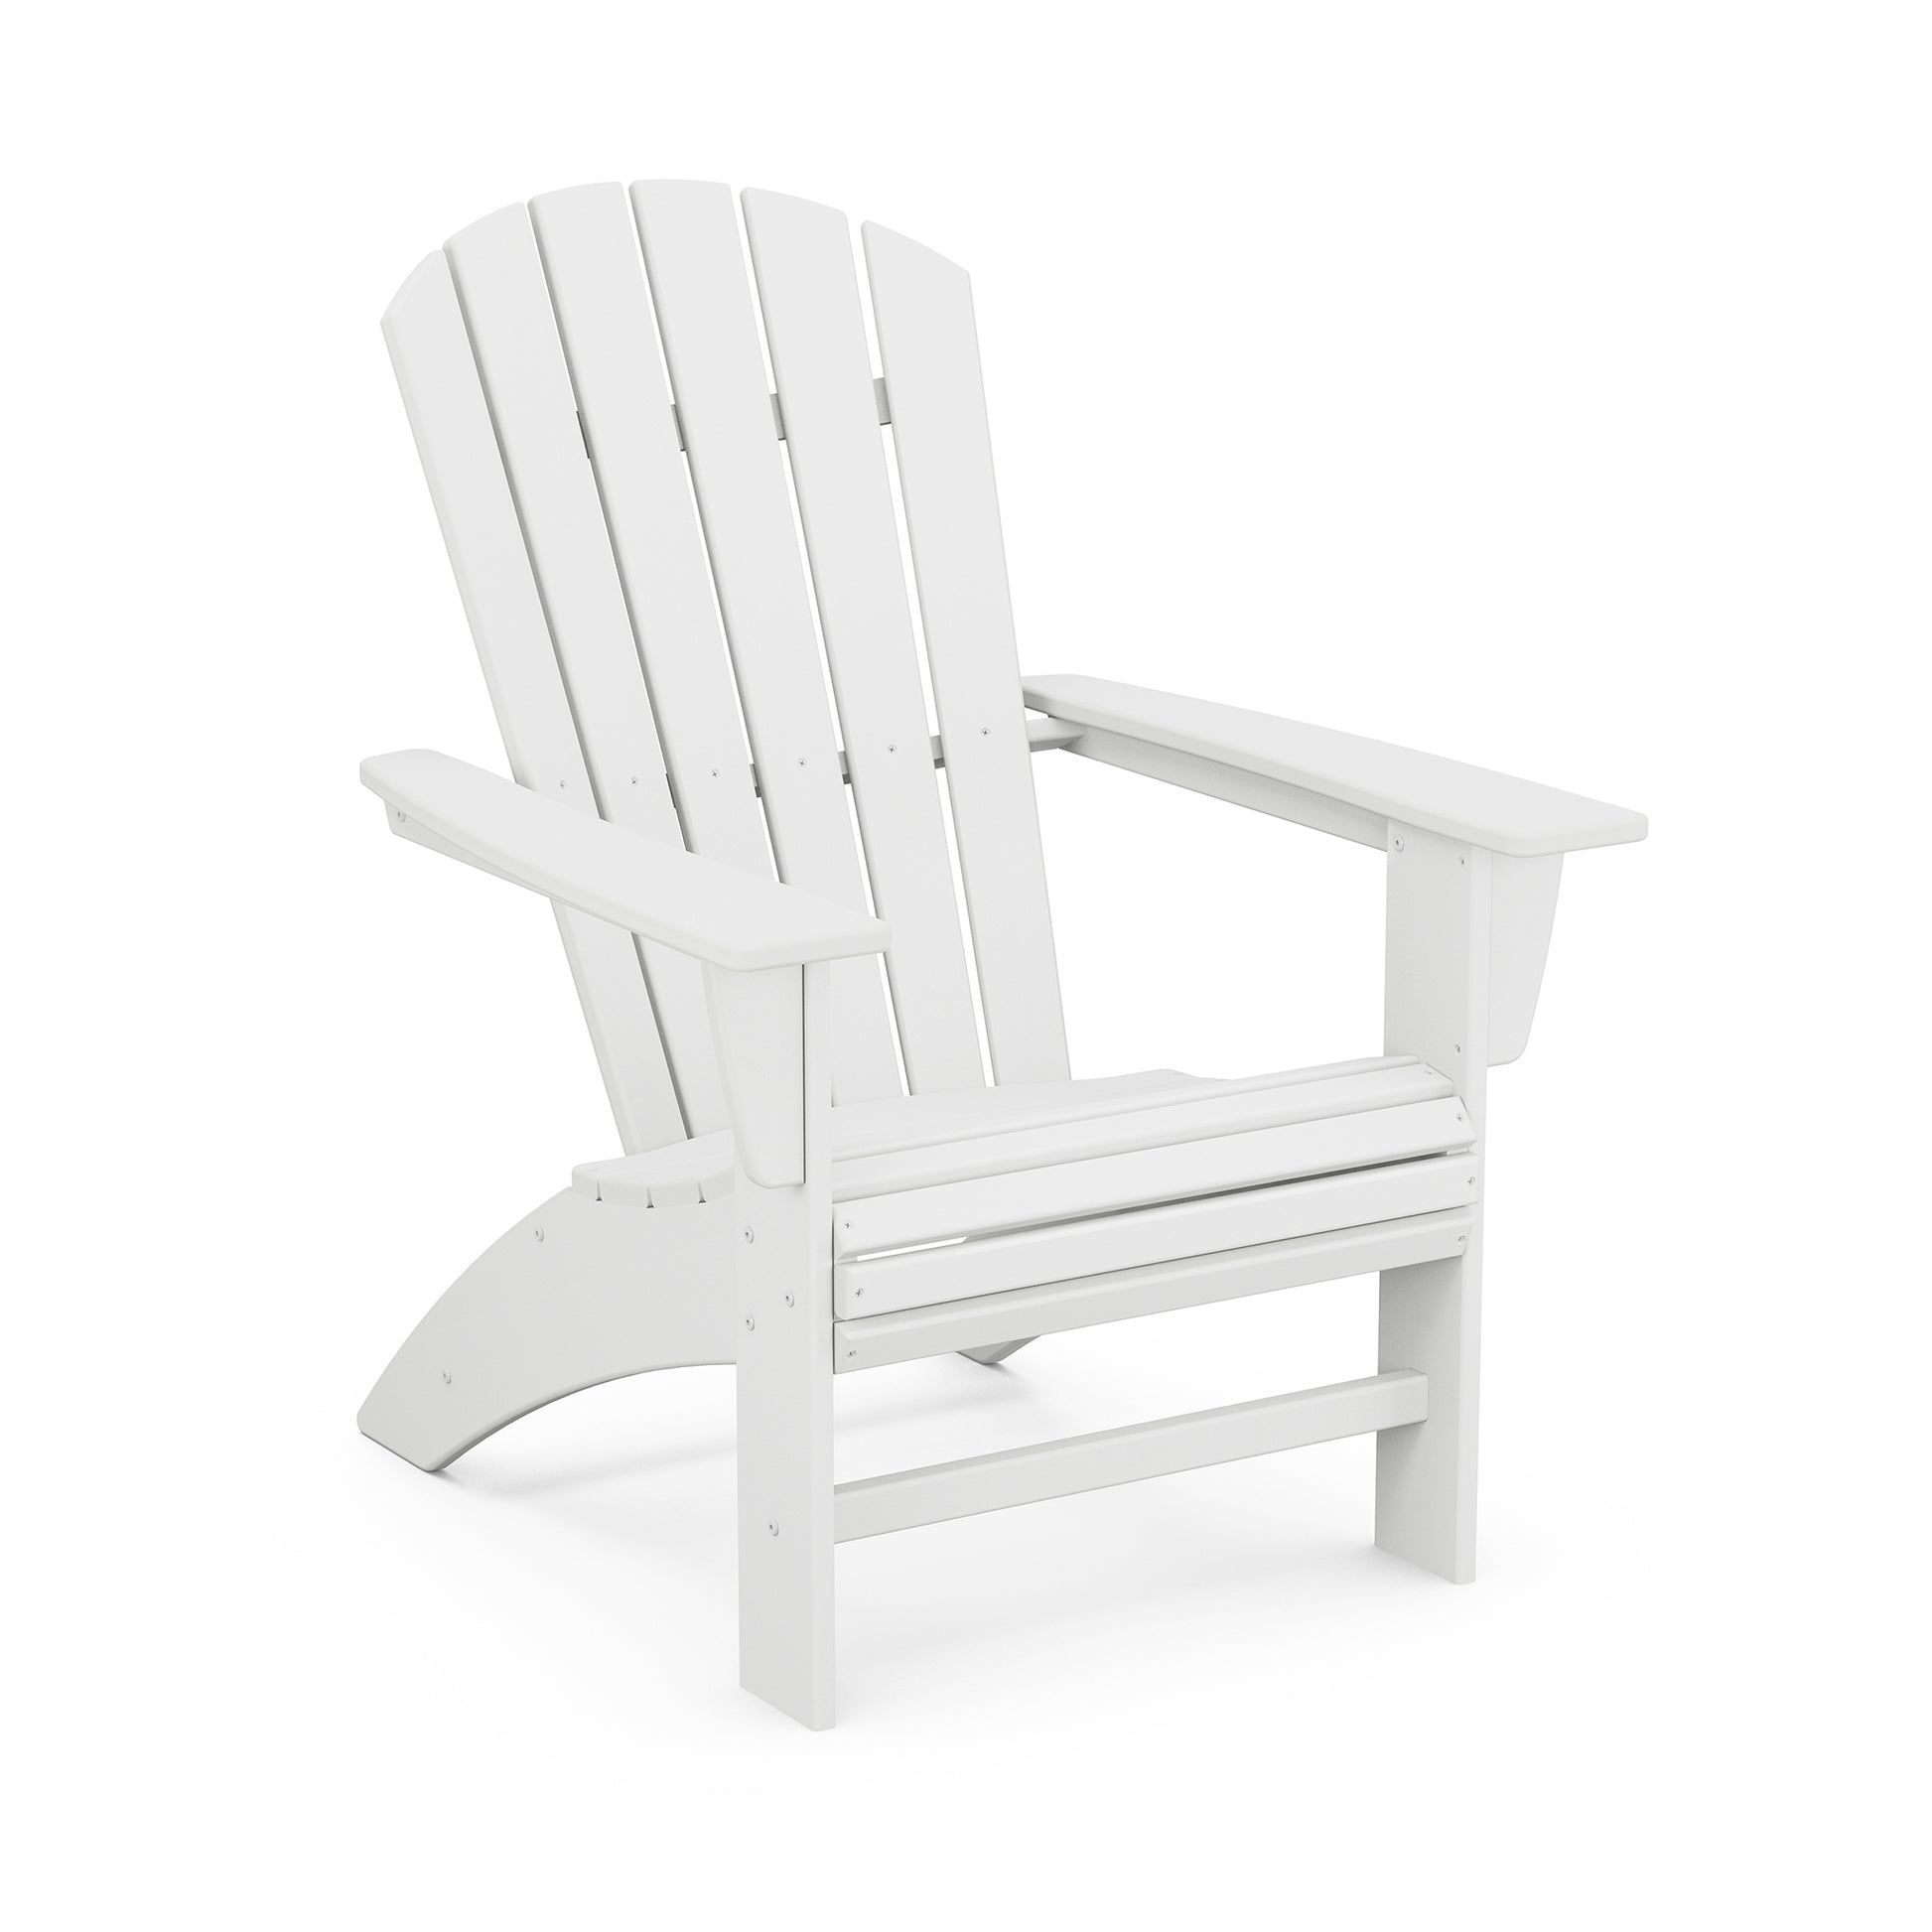 A single white POLYWOOD Nautical Curveback Adirondack chair made of eco-friendly POLYWOOD® lumber, featuring a slatted back and seat design, shown isolated on a white background.